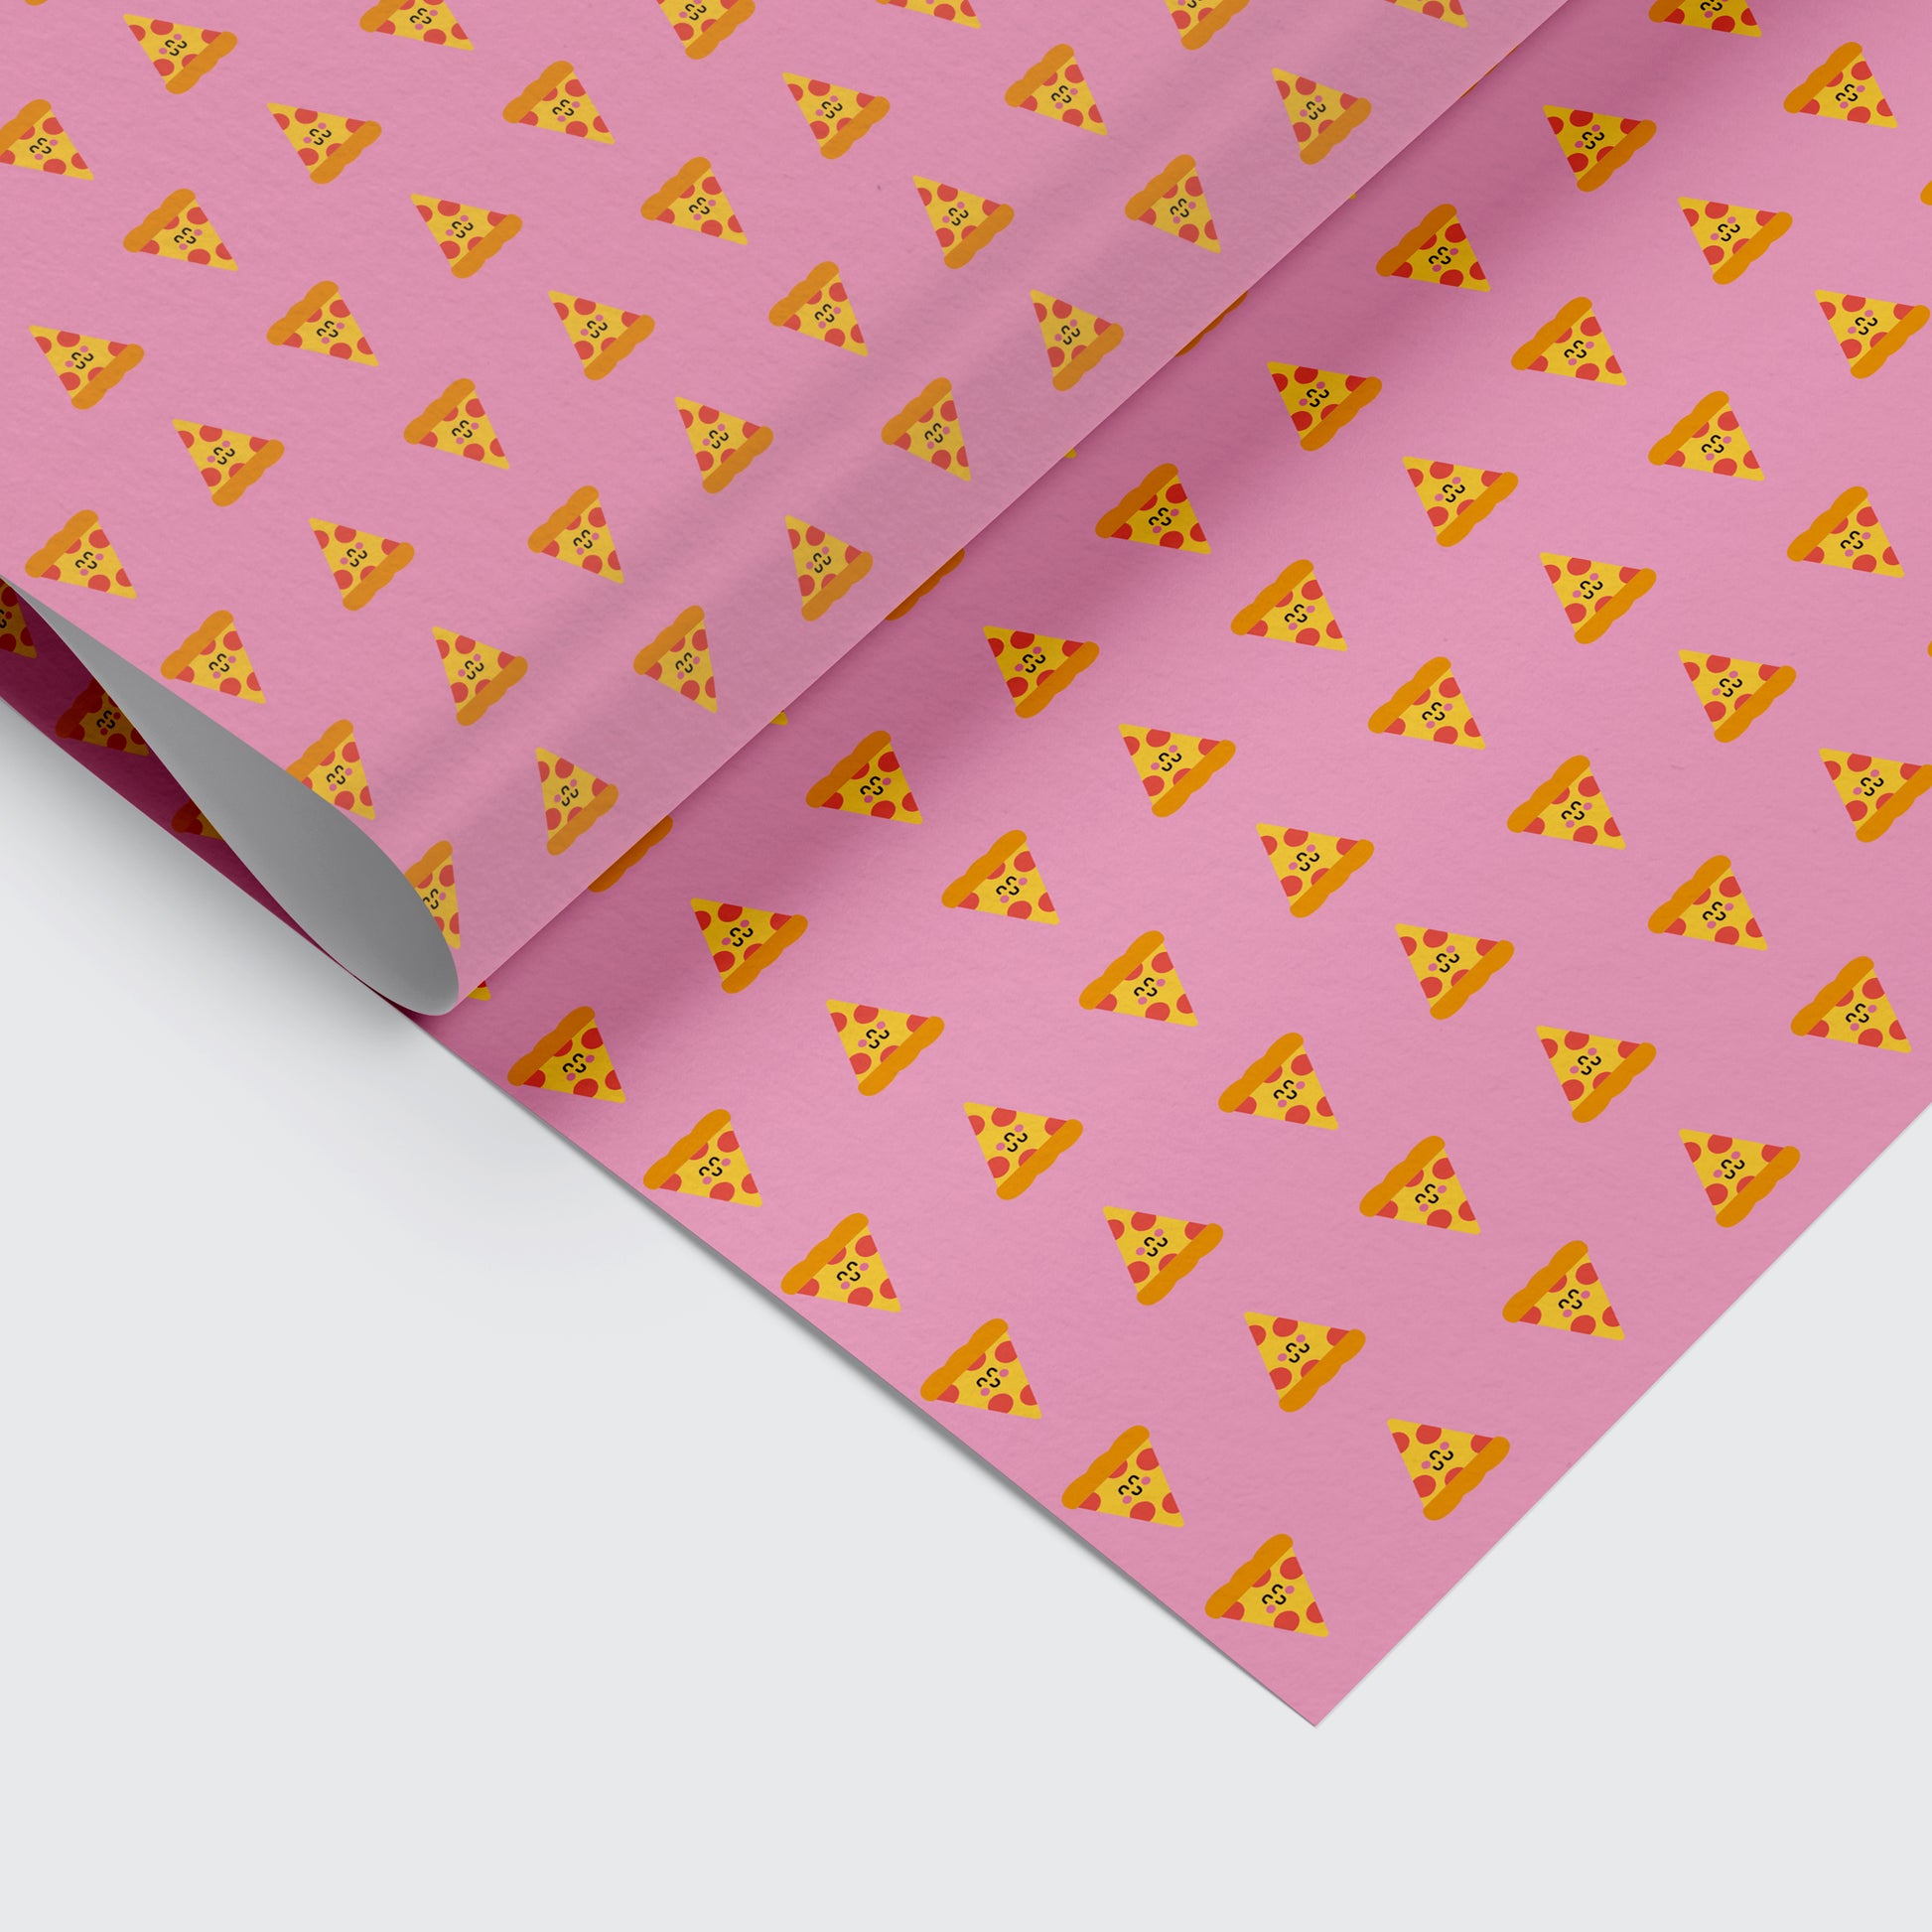 wrapping paper with pizza pattern on it